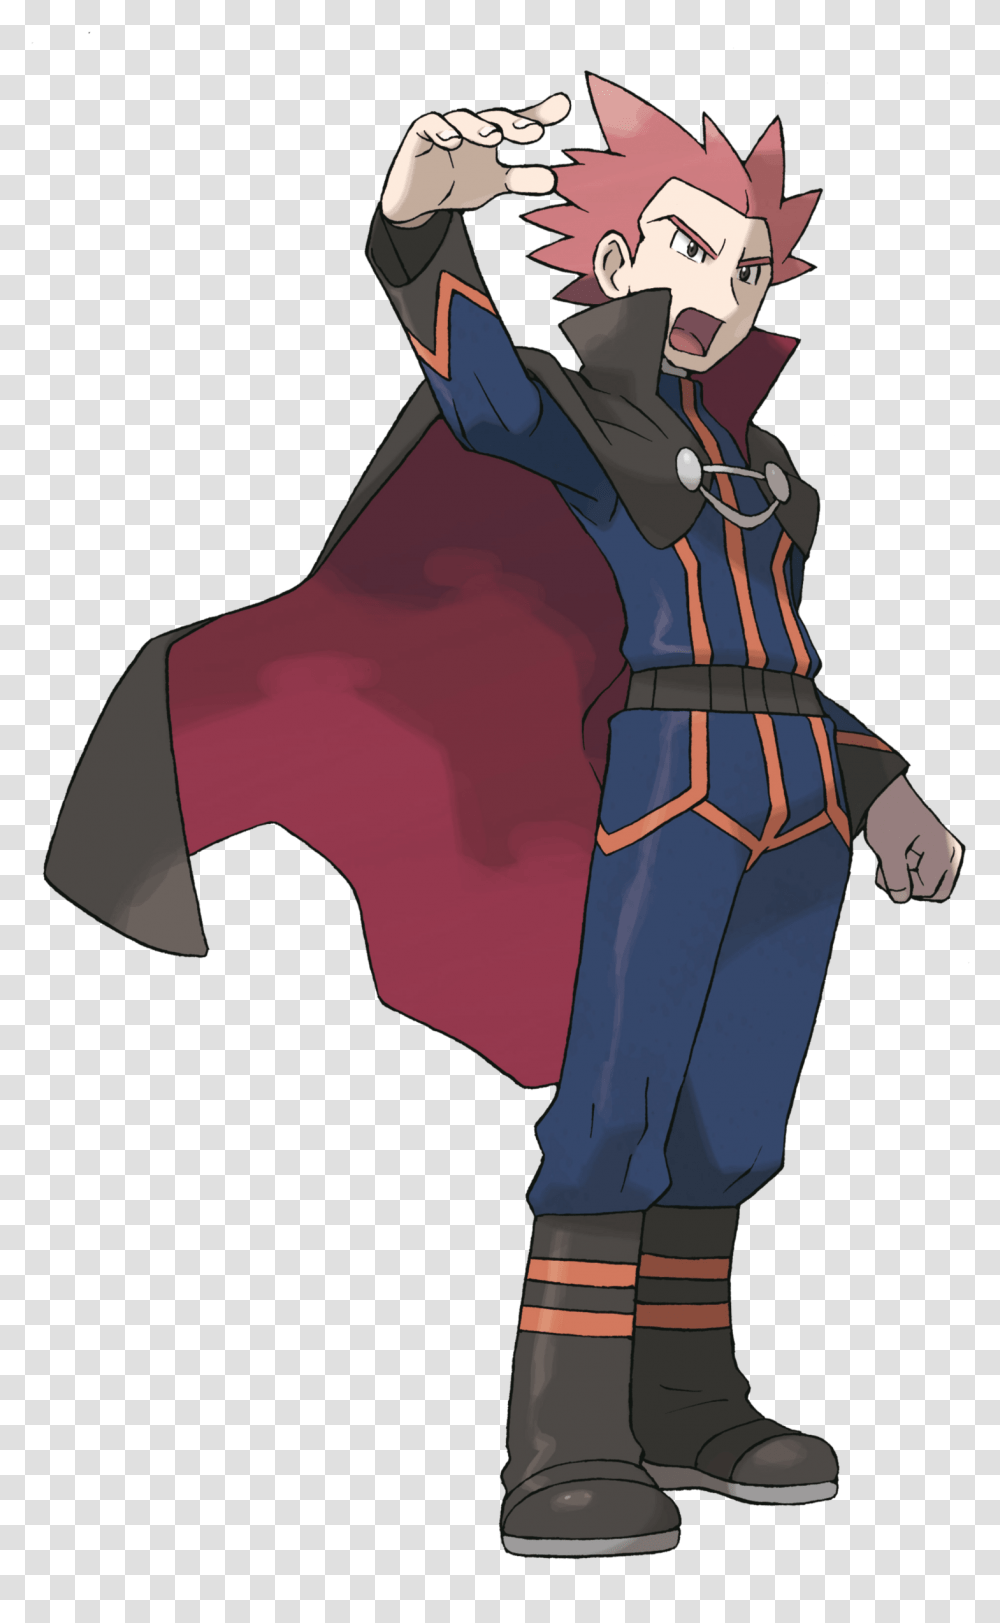 Download Lance Pokemon Image With Pokemon Go Lance, Clothing, Costume, Sleeve, Person Transparent Png